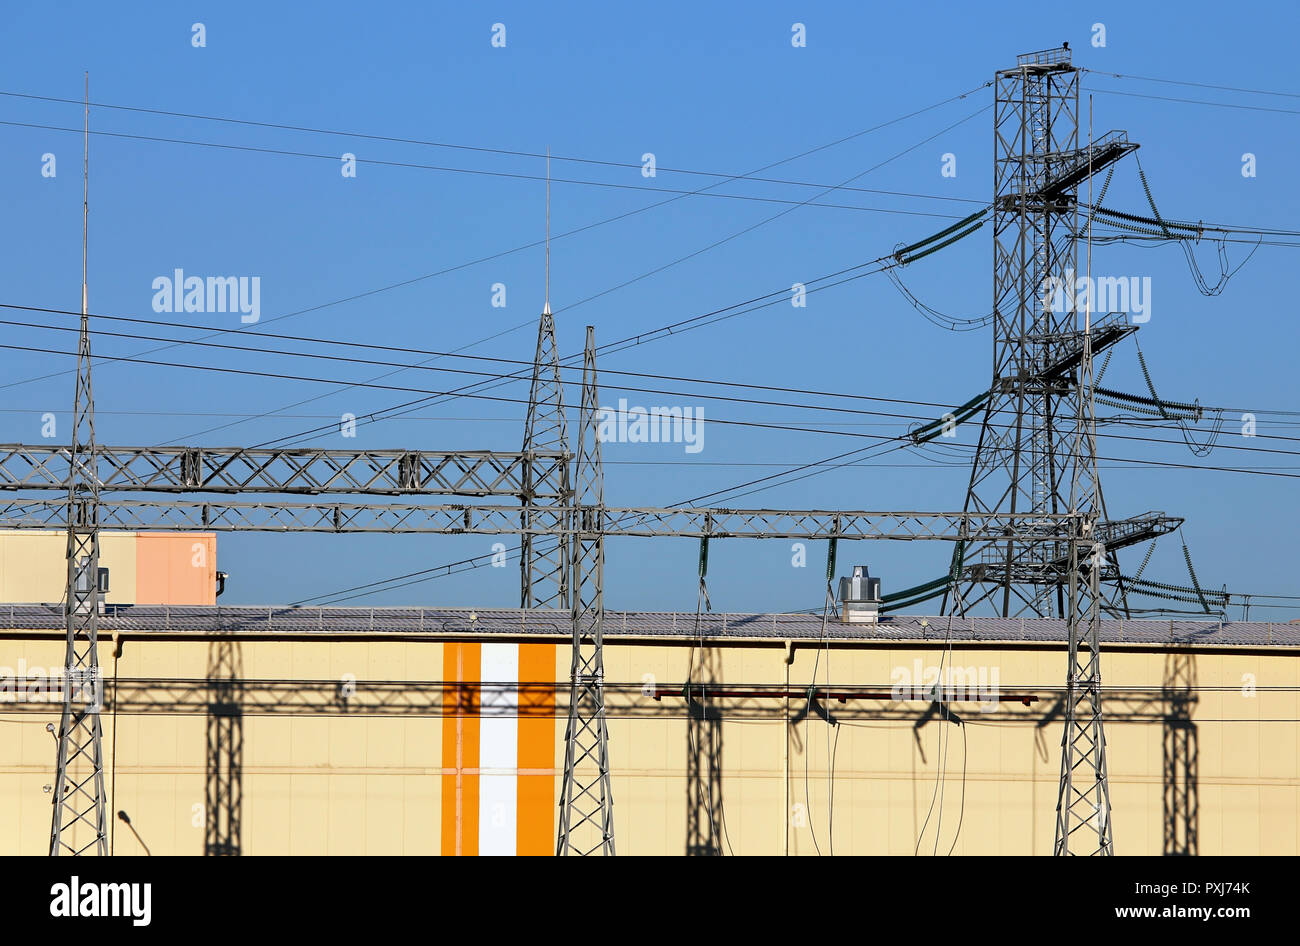 Large industrial facility with high-voltage power transmission lines Stock Photo